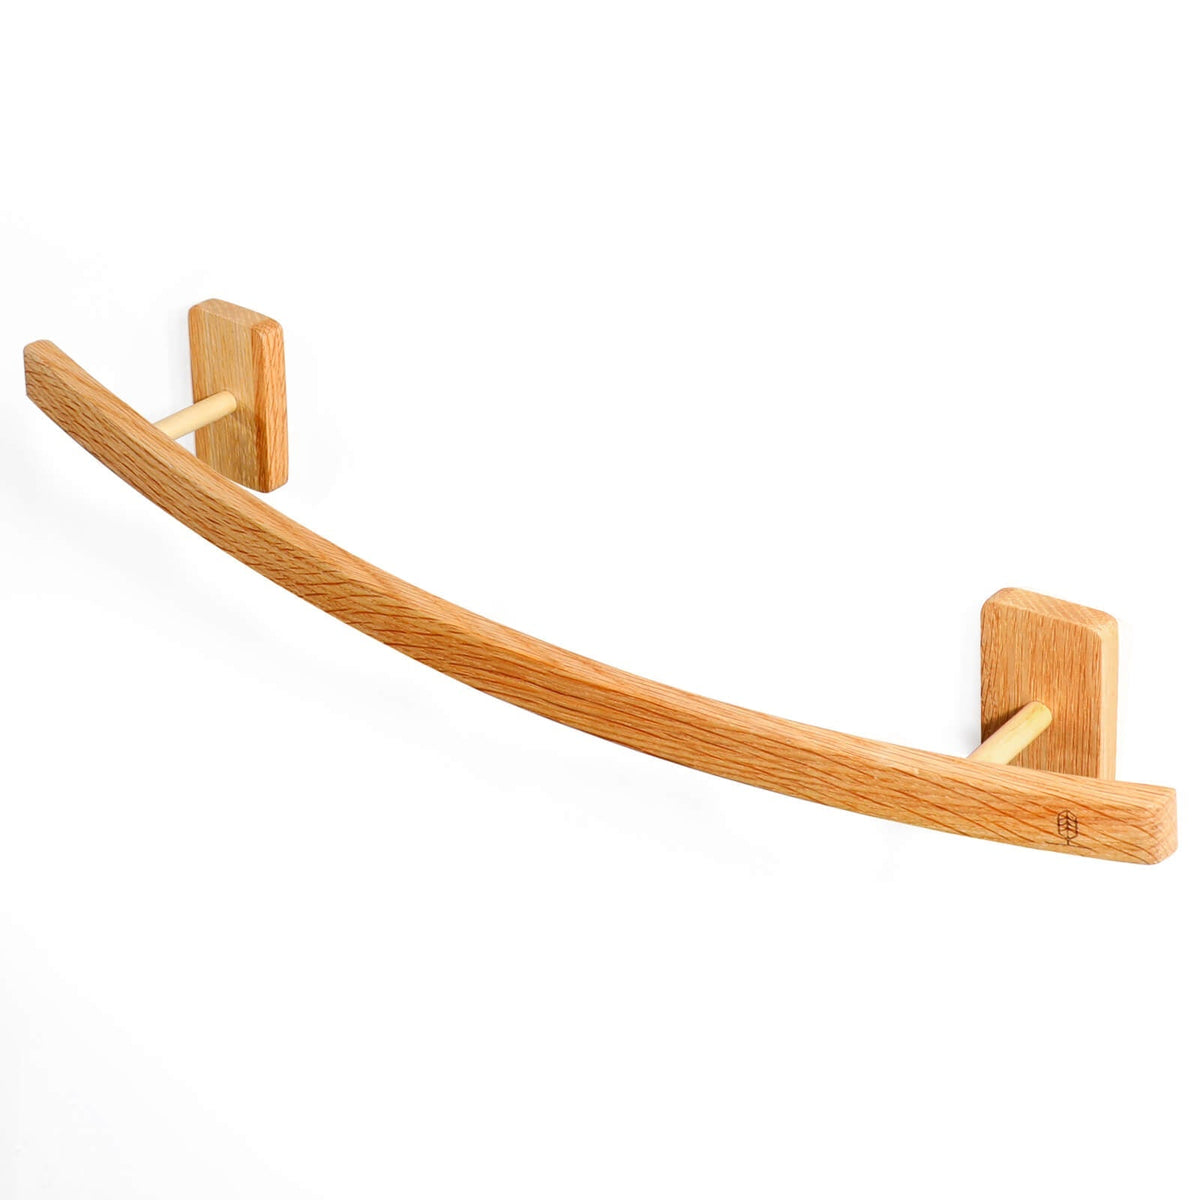 Bathroom Wall Mounted Wooden Towel Bar Holder | Double Layer